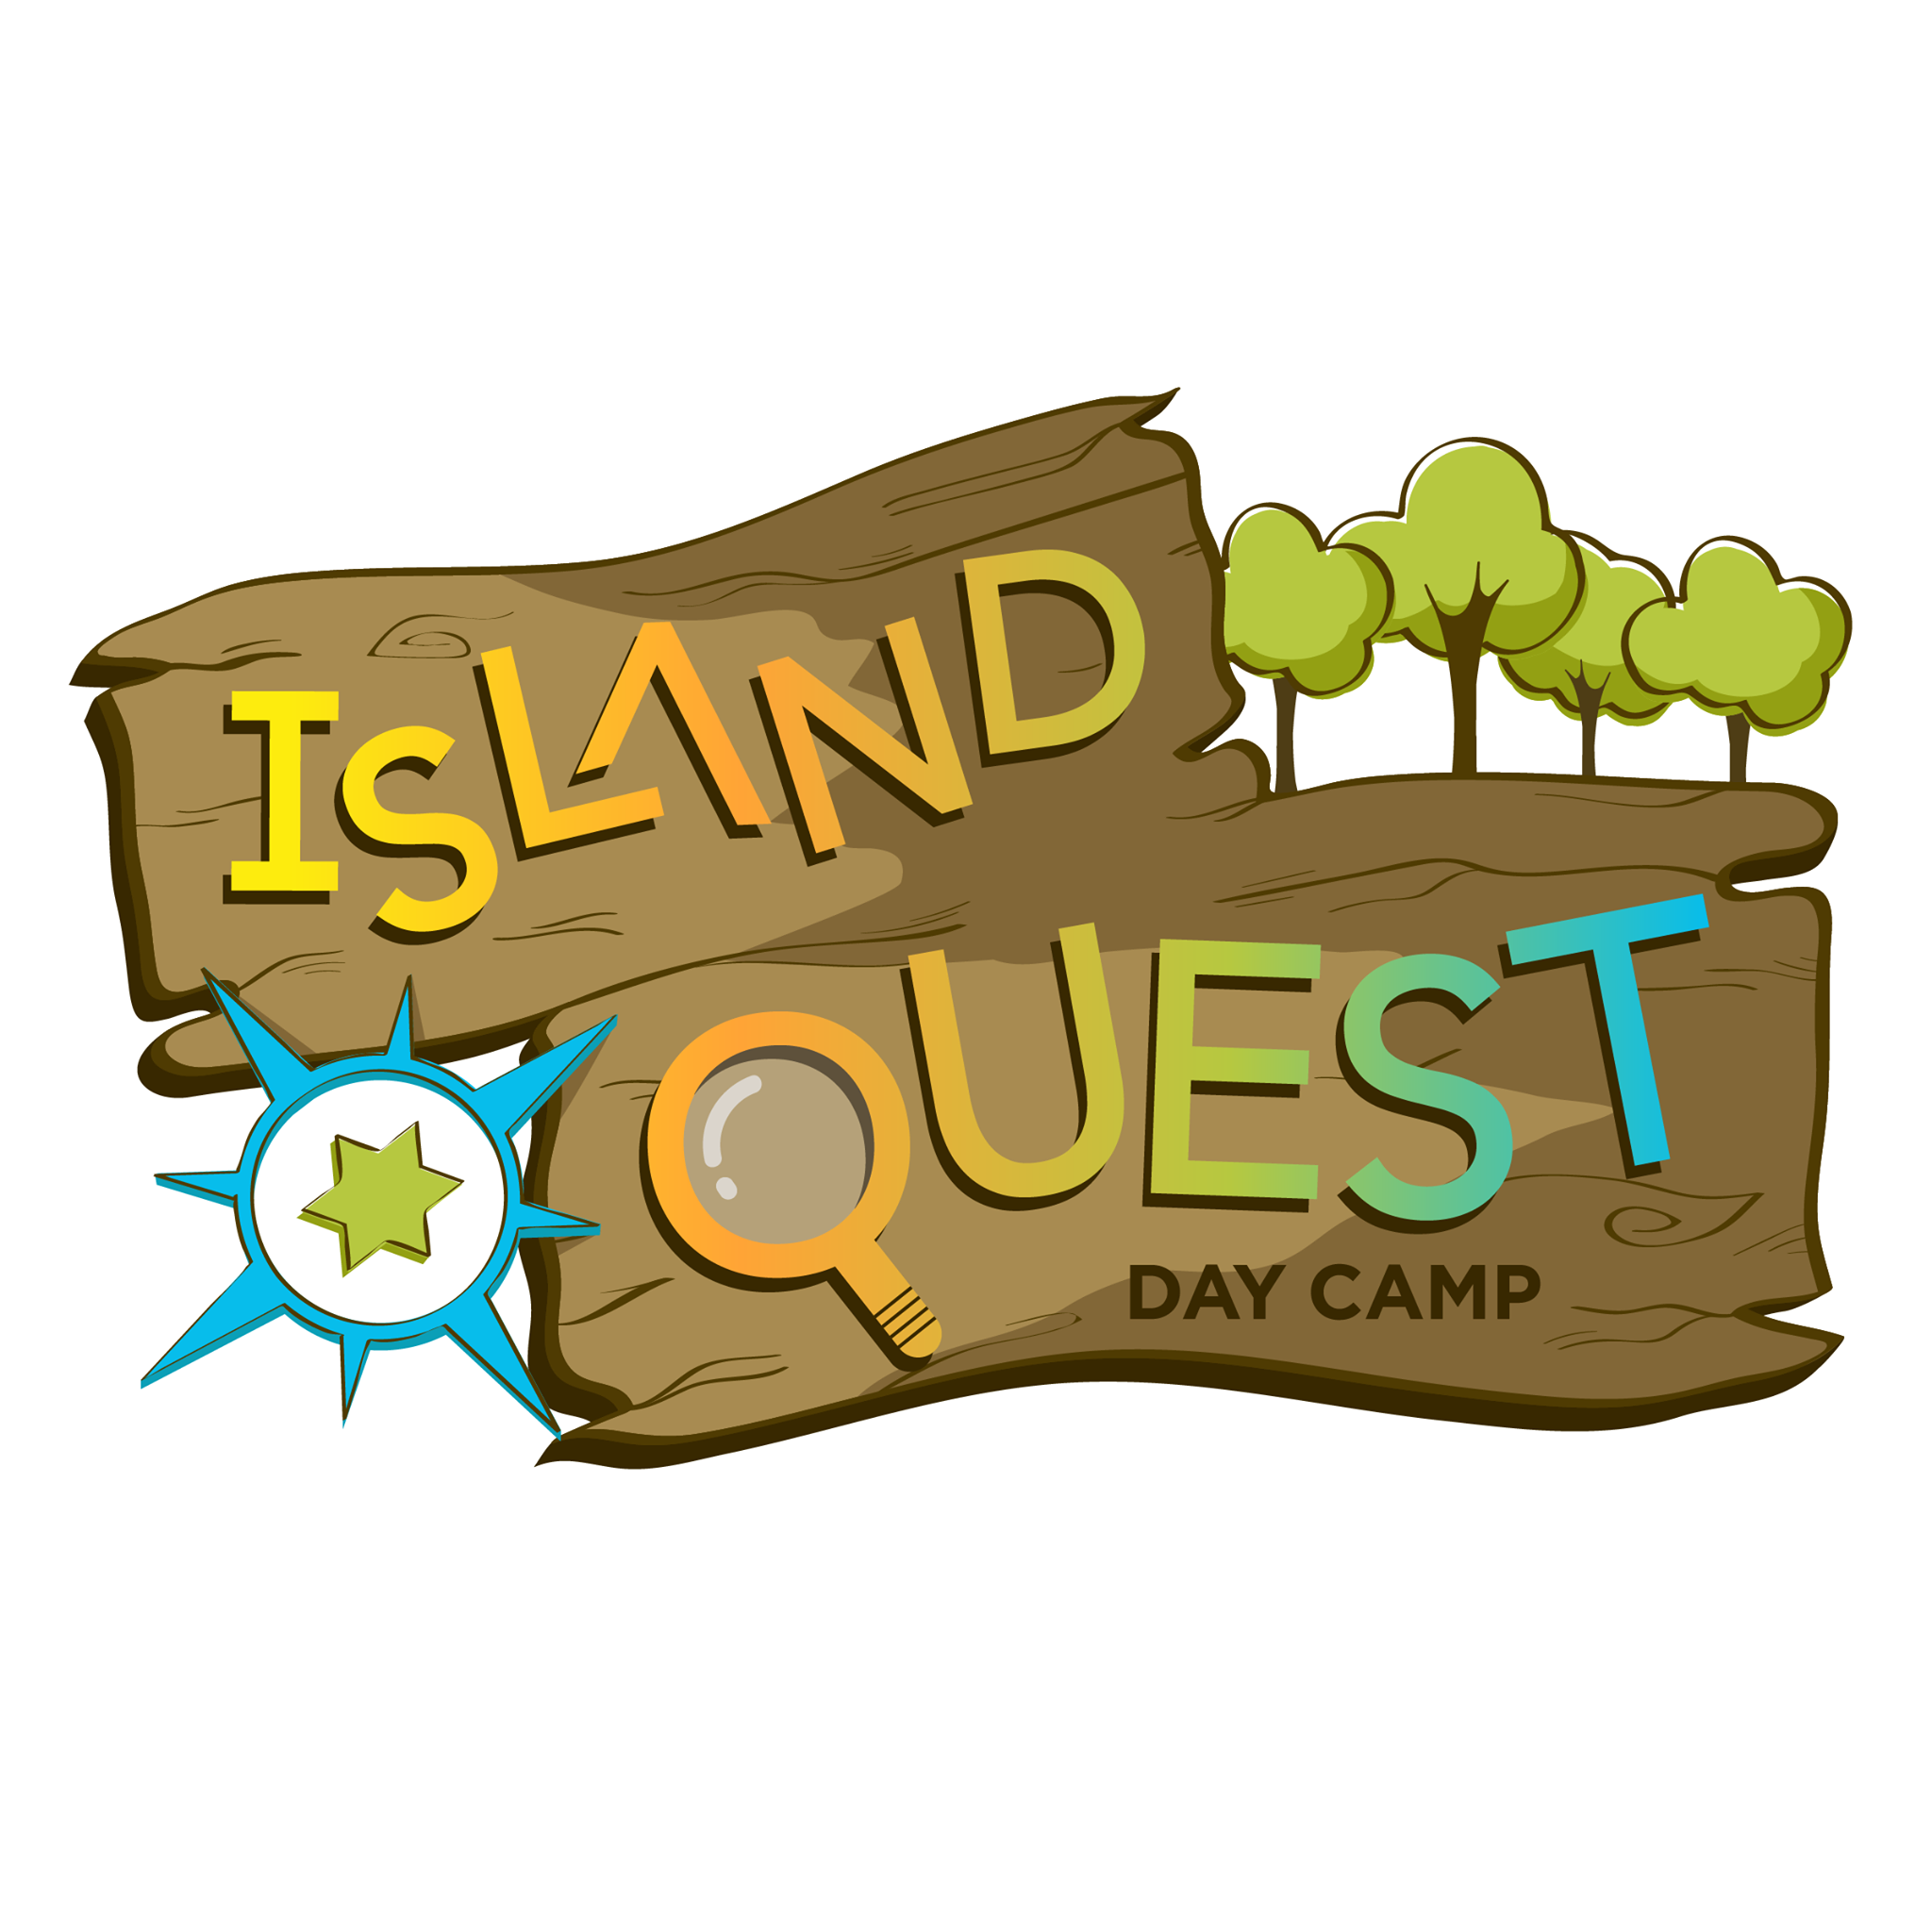 Logo for Island Quest Day Camp